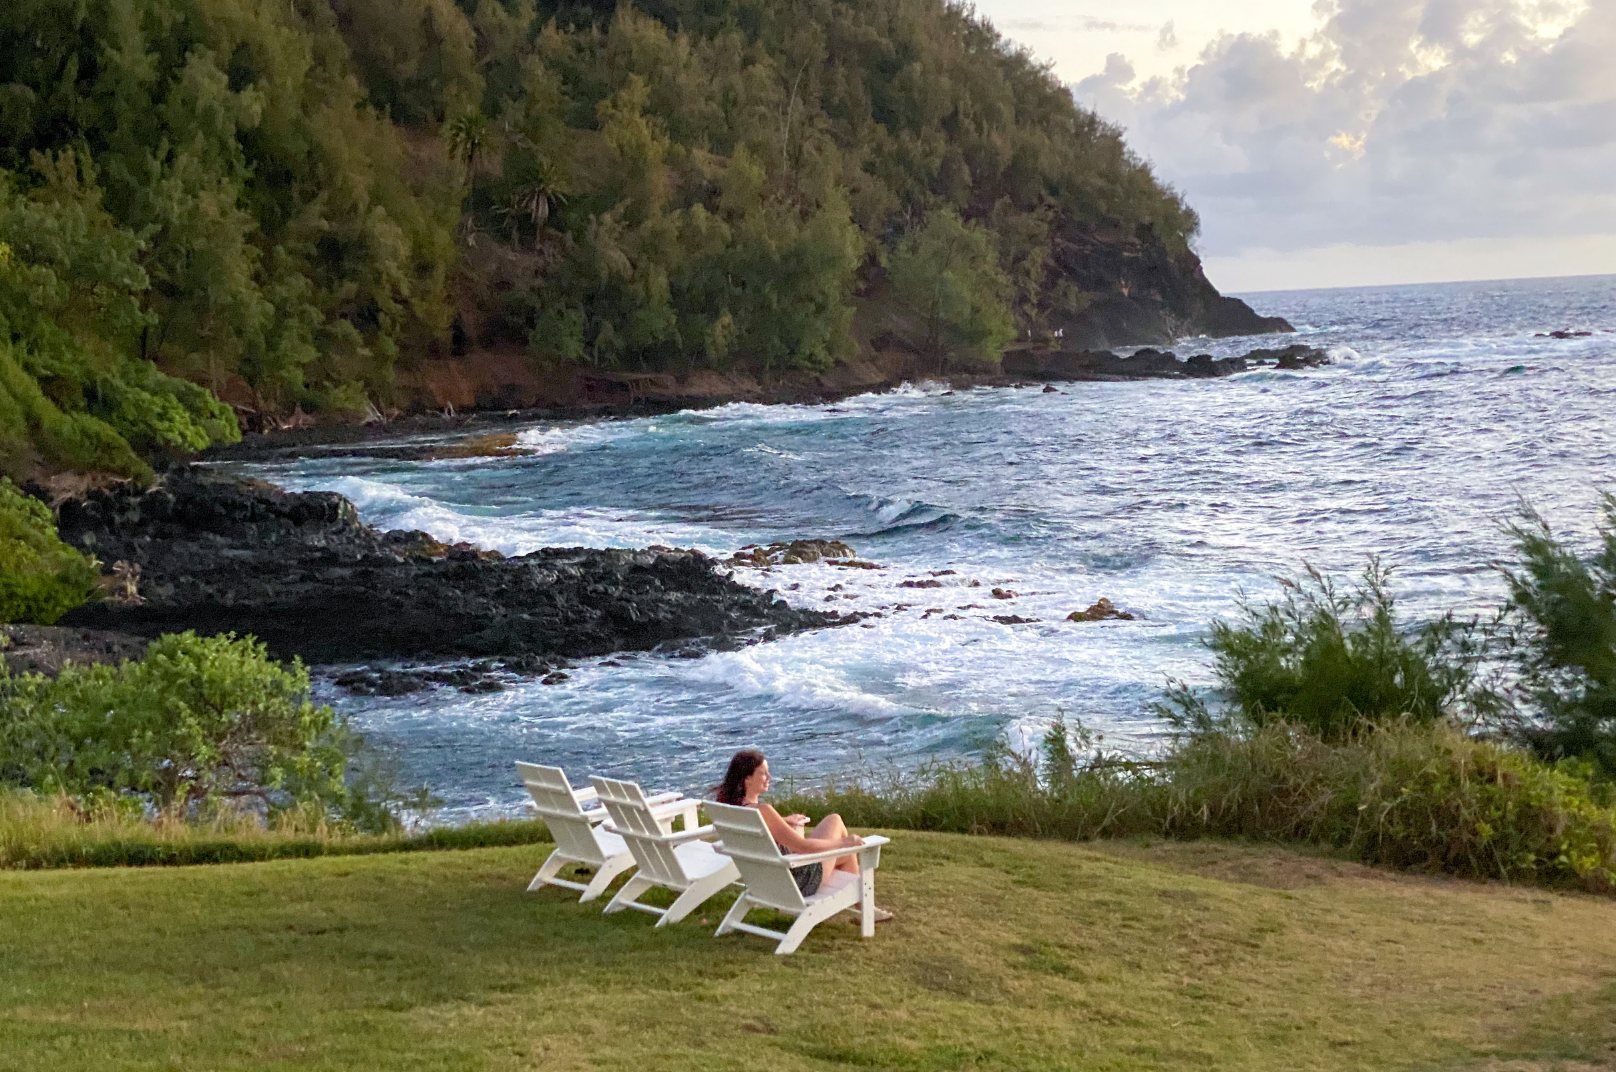 romantic things to do in Maui